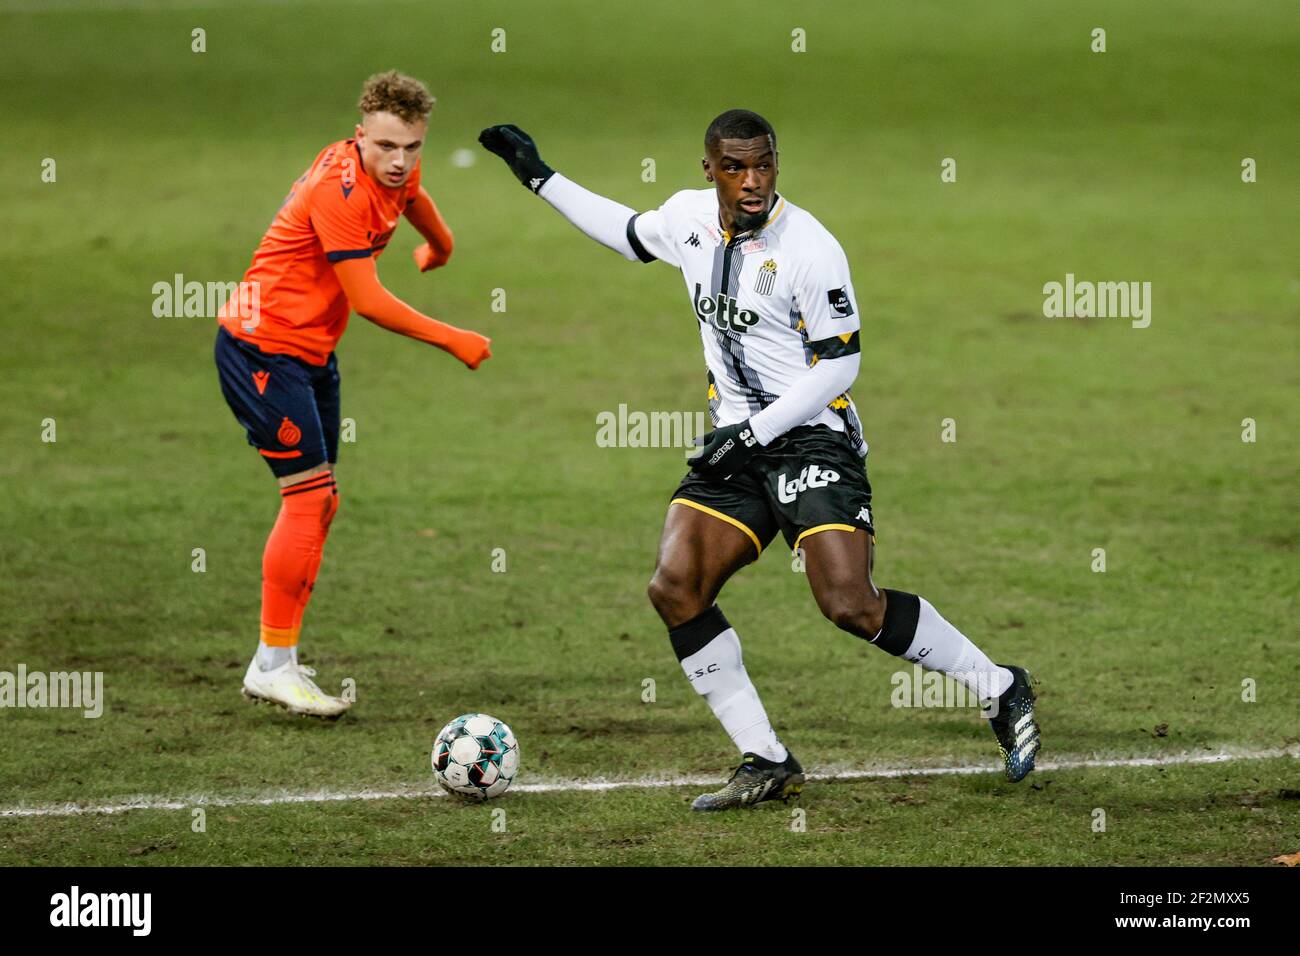 Club's Noa Lang and Charleroi's Cedric Kipre fight for the ball during a postponed soccer match between Sporting Charleroi and Club Brugge KV, Friday Stock Photo